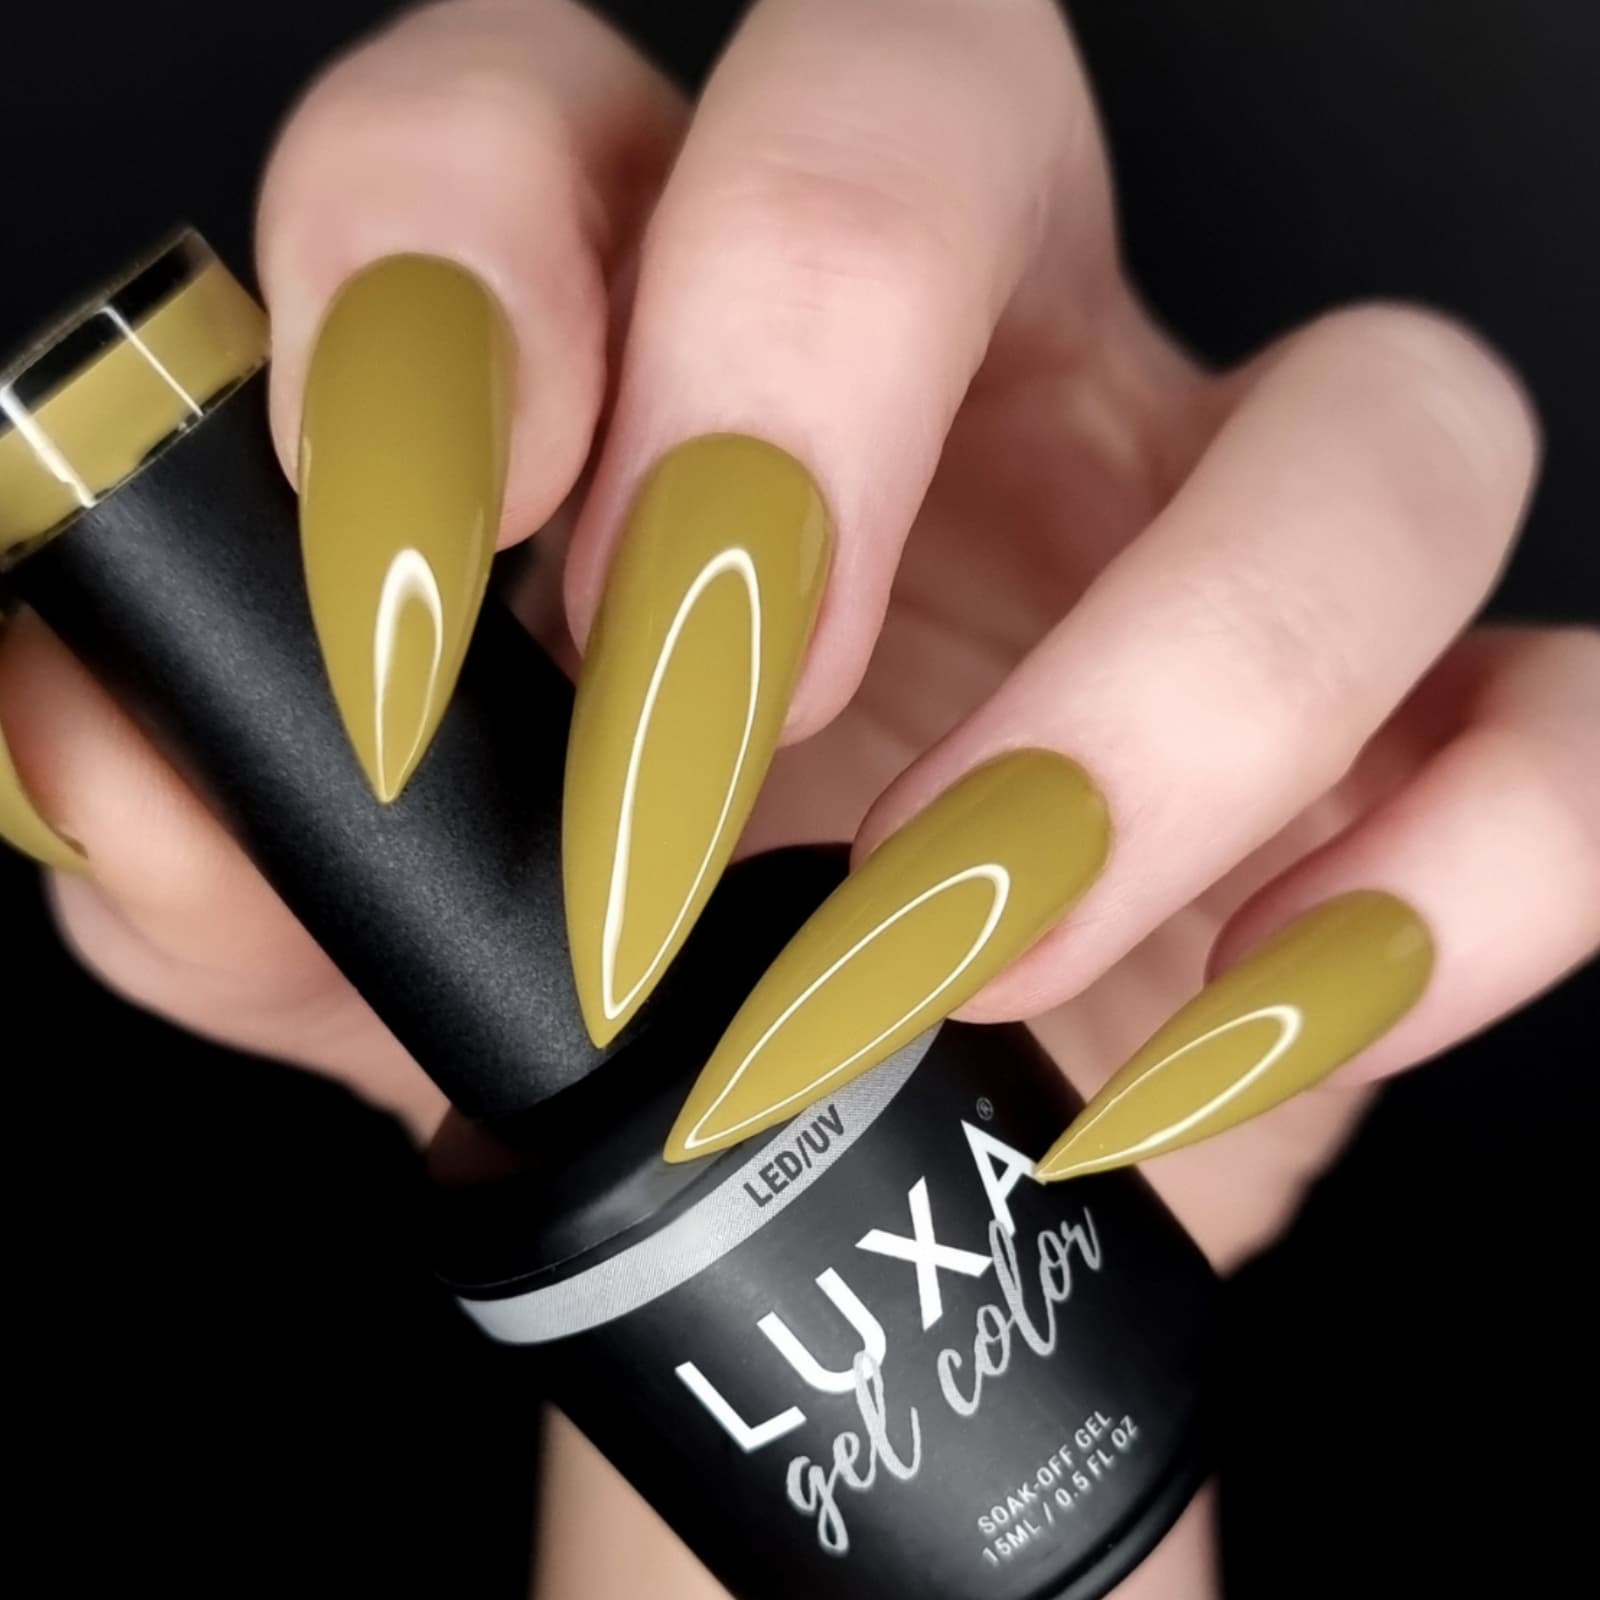 Luxapolish Olive Juice Collection - 6pcs with Free Painted Swatch Sticks